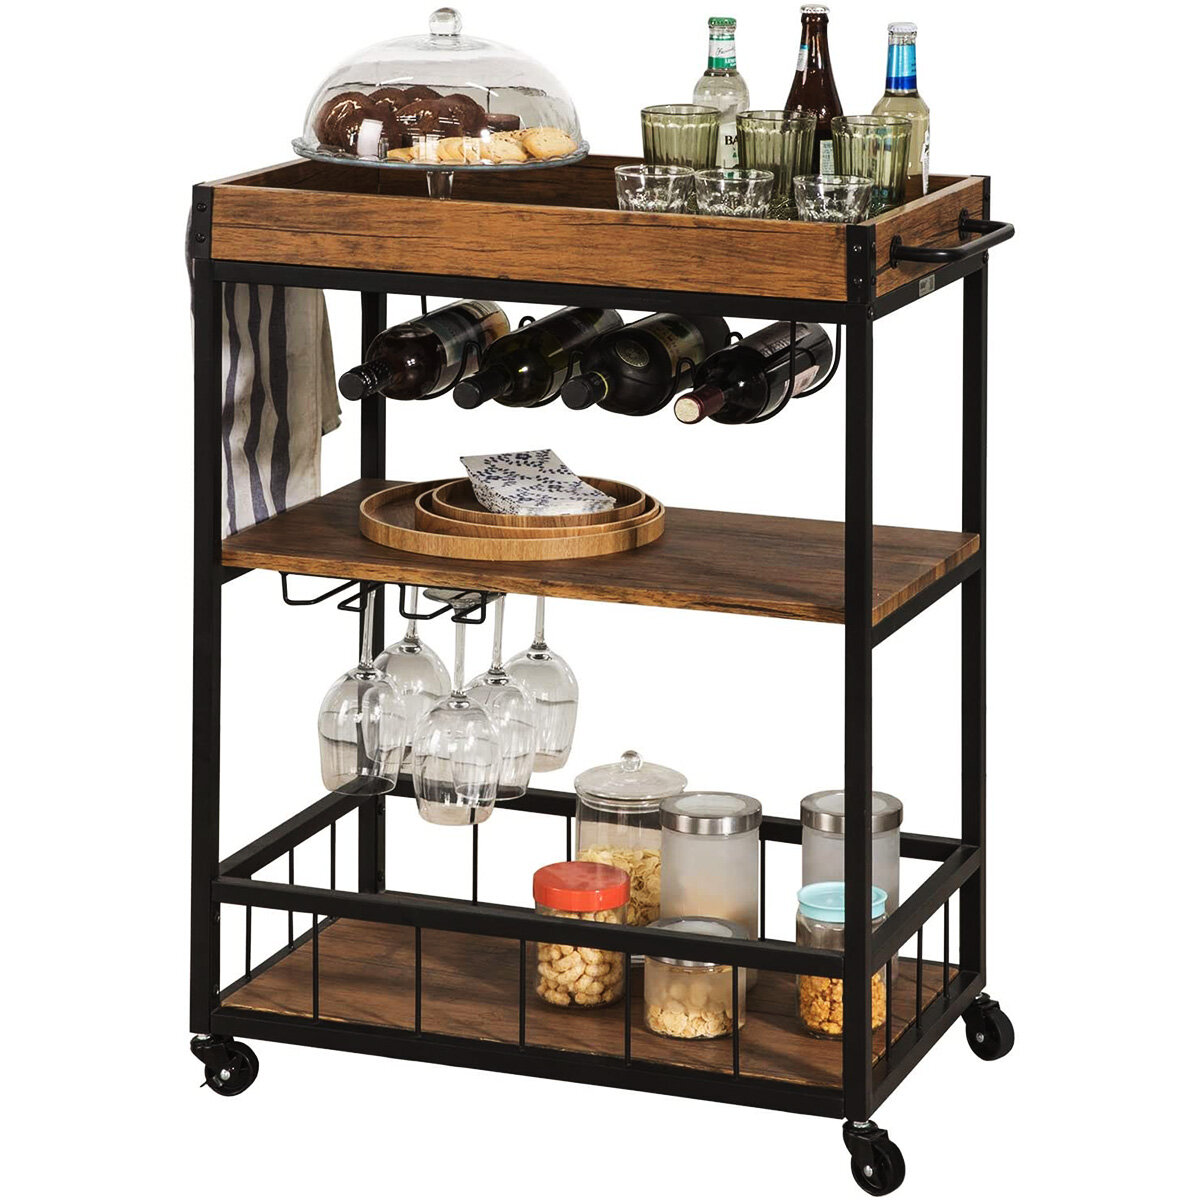 

Dinaza 3-Tier Bar Carts Kitchen Serving Utility Cart on Wheels with Storage for Outdoor Kitchen Club Living RoomWood F